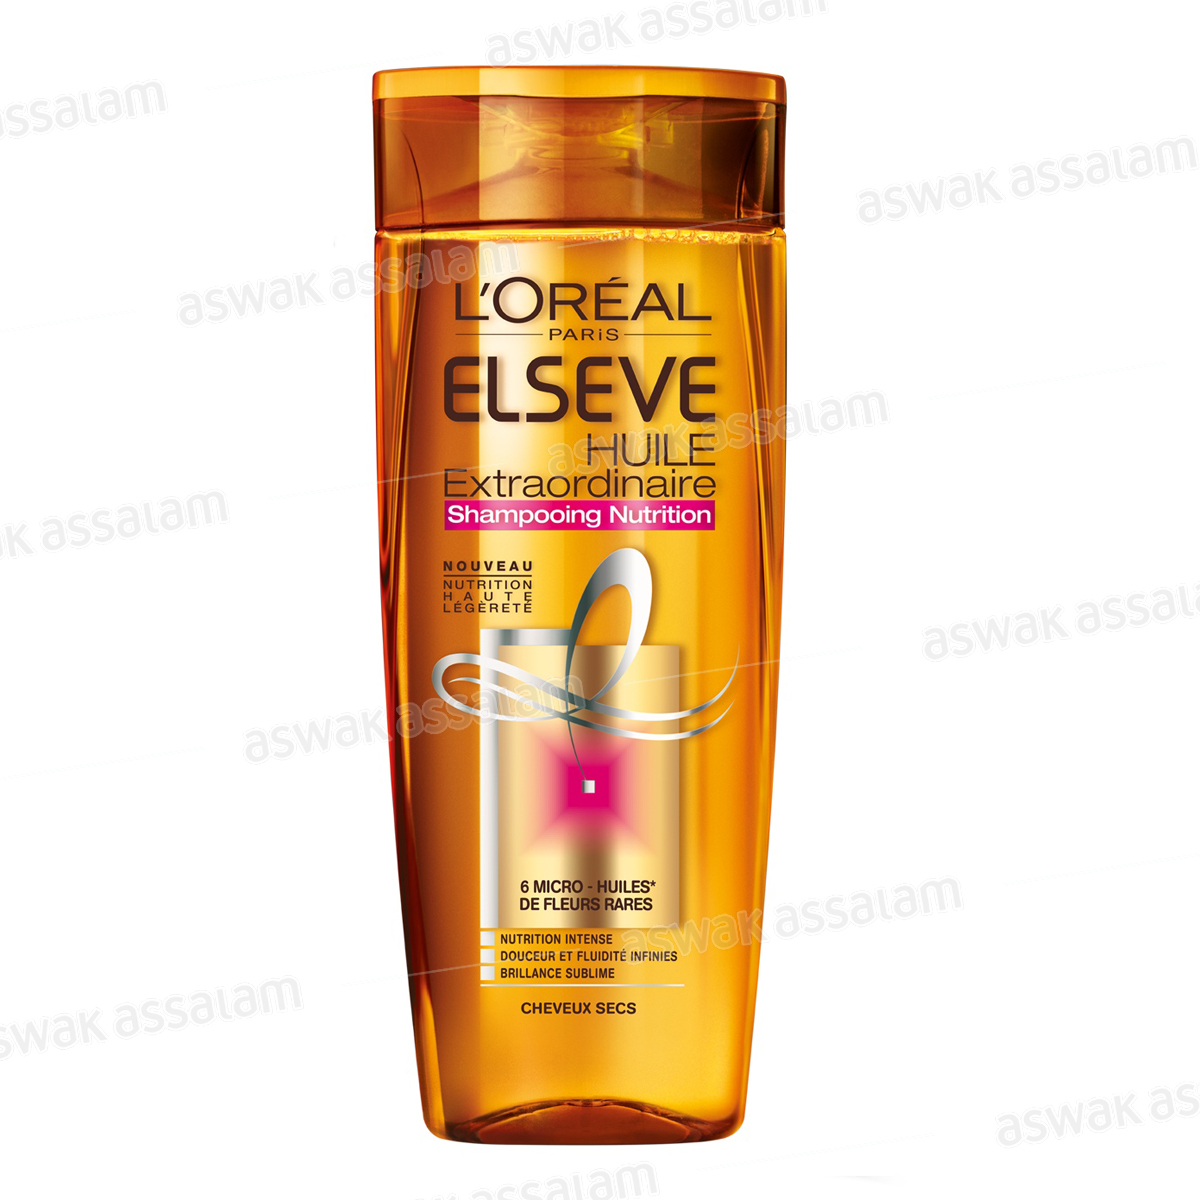 SHAMPOOING HUILE EXTRAORDINAIRE CHEVEUX NORMAUX A SECS 400ML ELSEVE